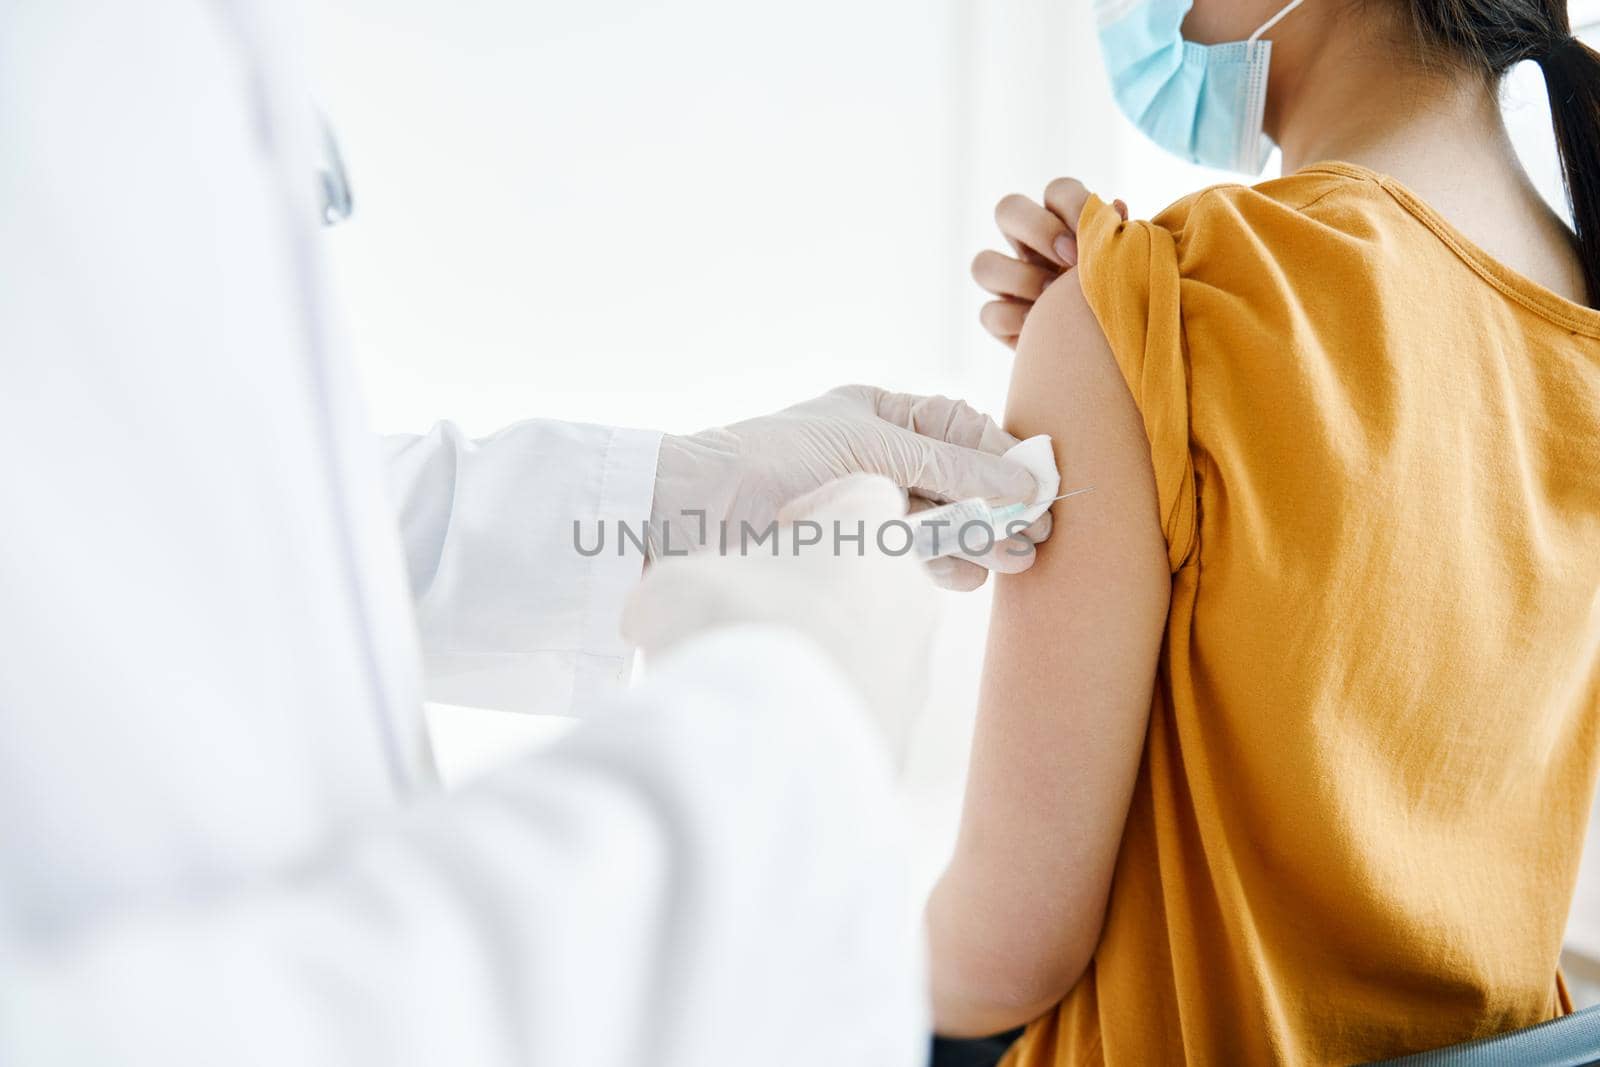 doctor giving an injection to the patient's shoulder close-up cropped view. High quality photo